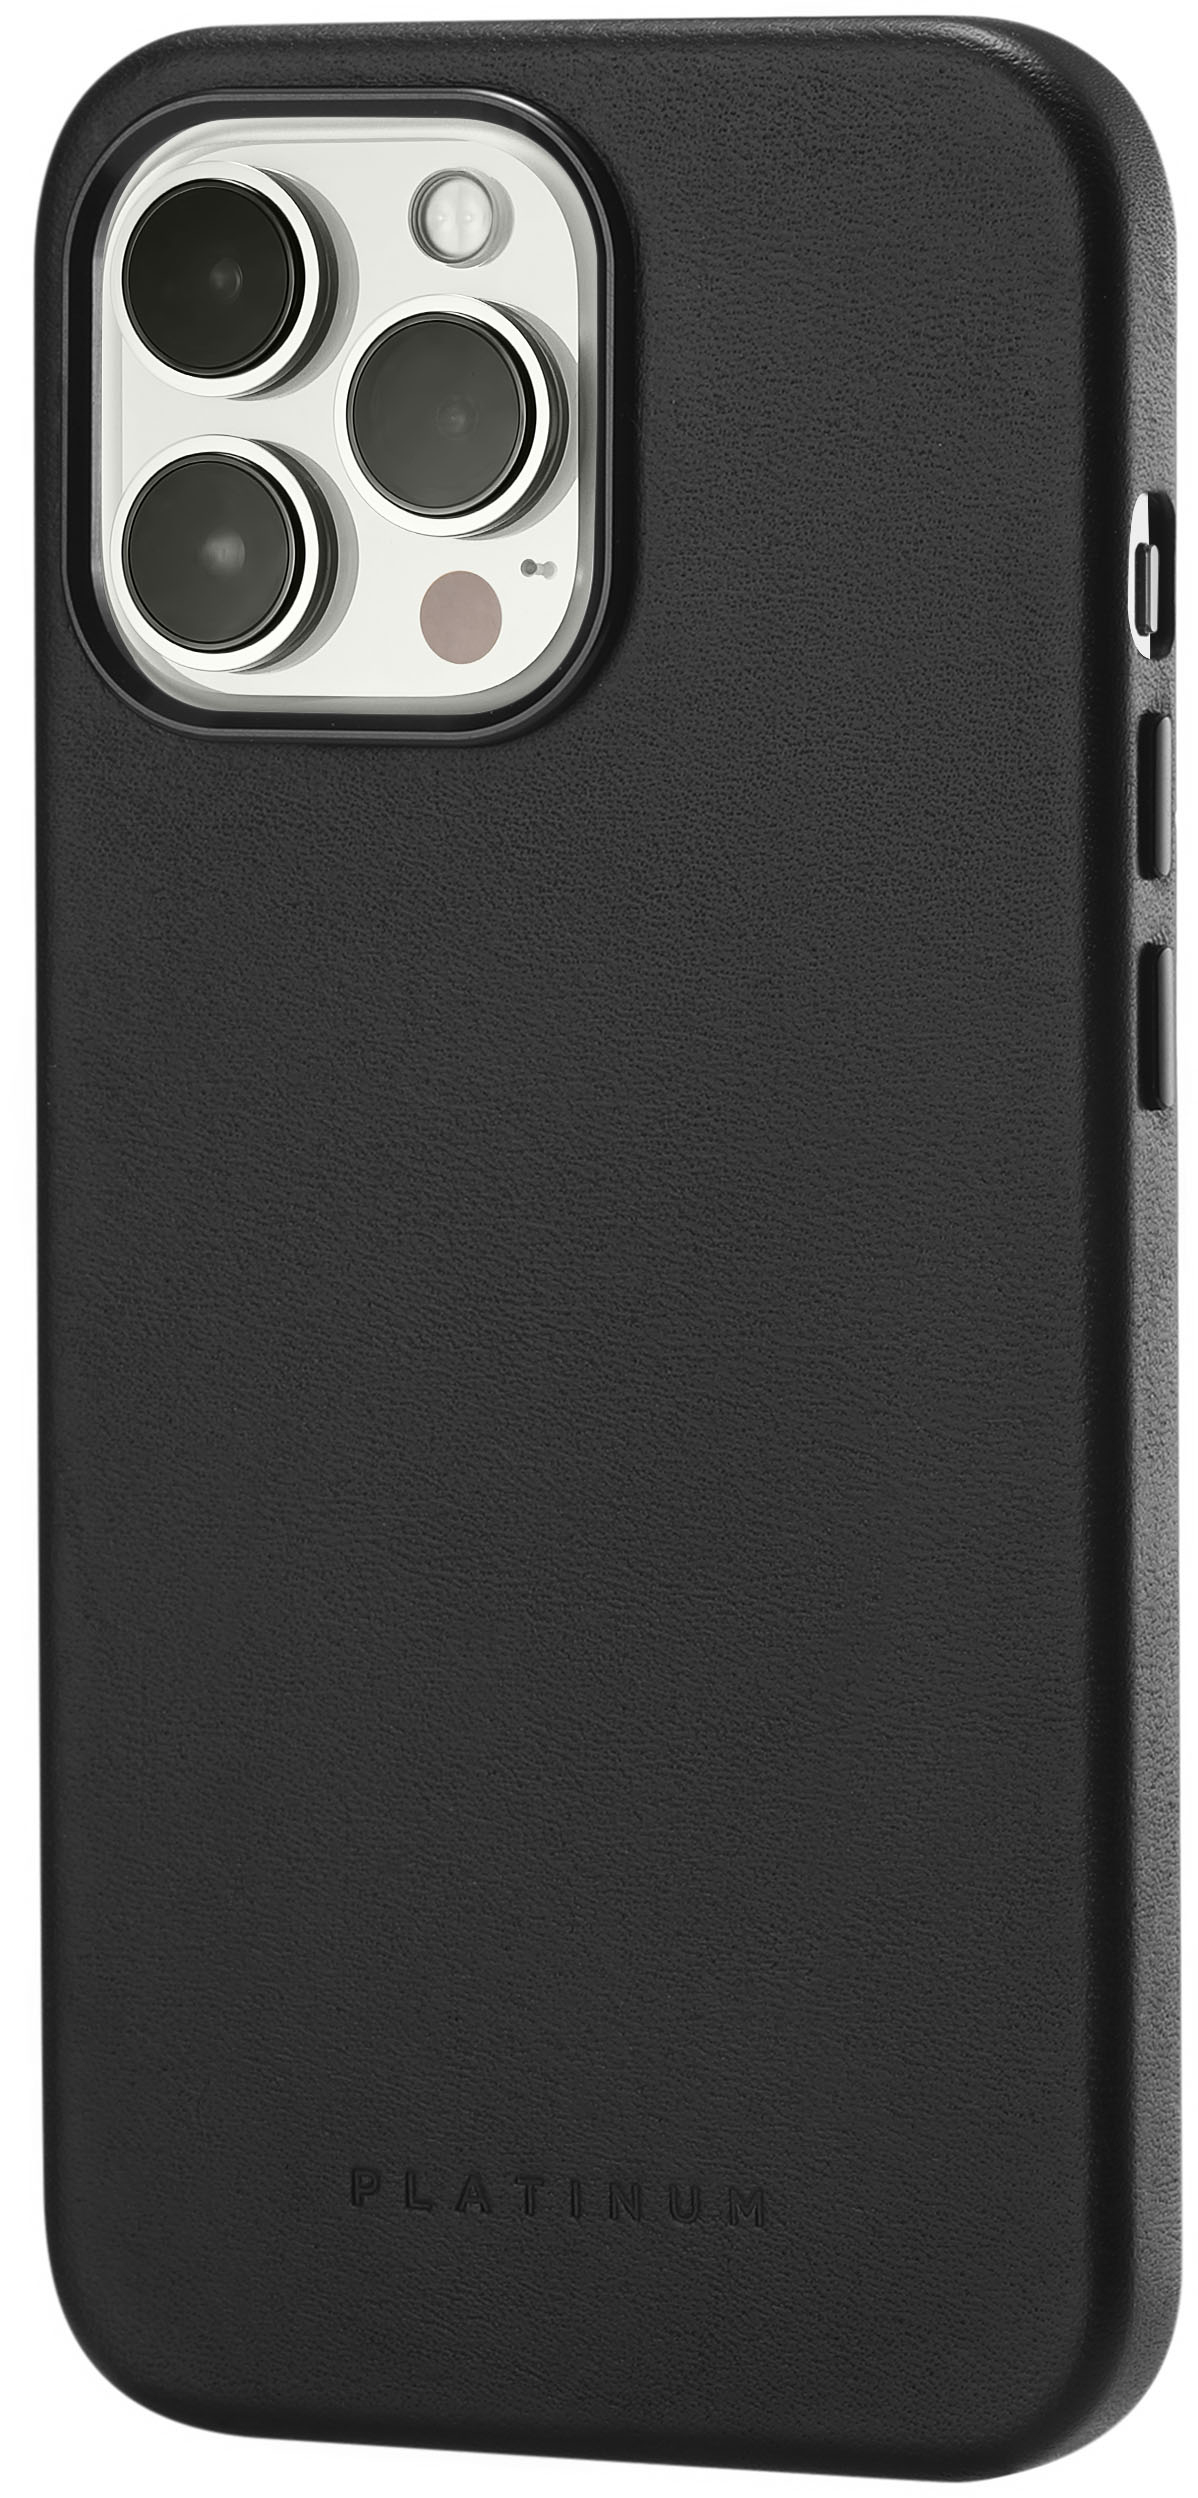 iPhone 14 Pro Leather Case | Brown (Works with MagSafe) - SANDMARC